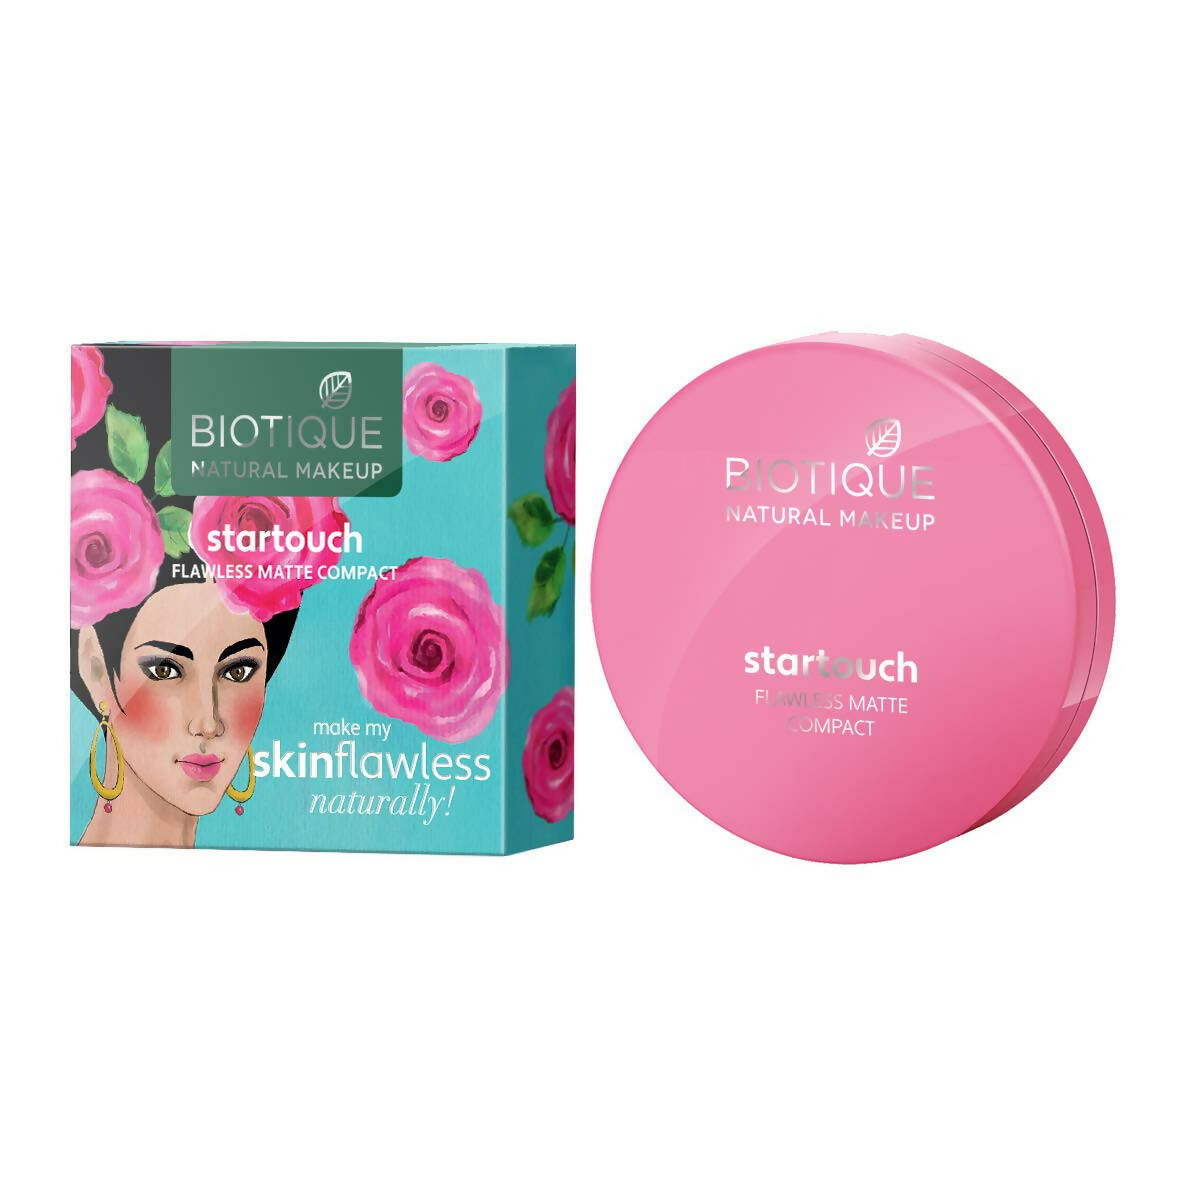 Biotique Natural Makeup Startouch Flawless Matte Compact - Tawny Nutmeg - BUDNE